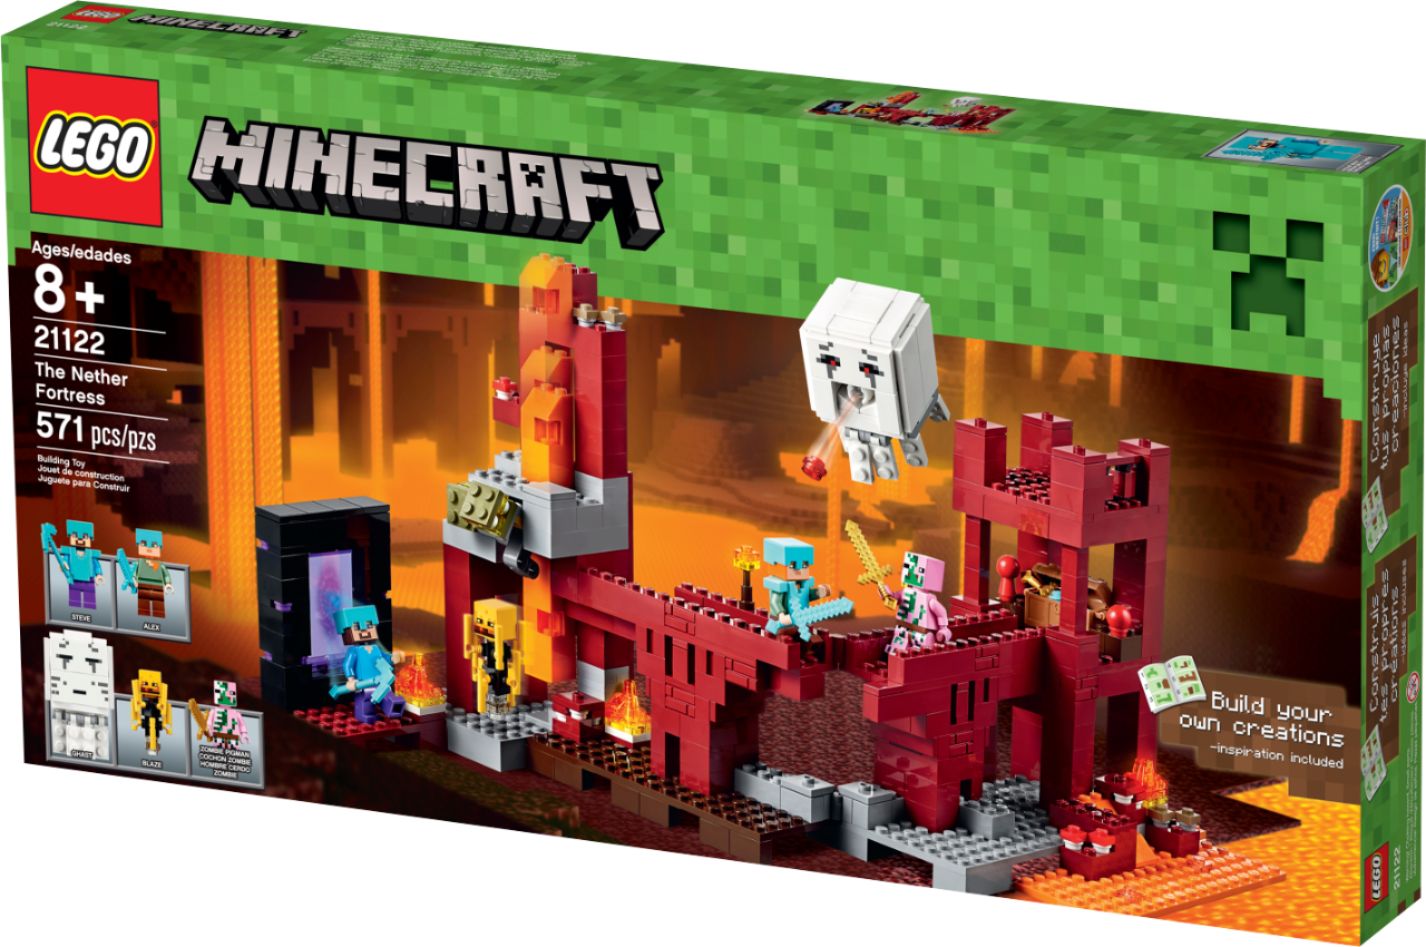 Lego Minecraft The Nether Fortress Toys Games Building Sets